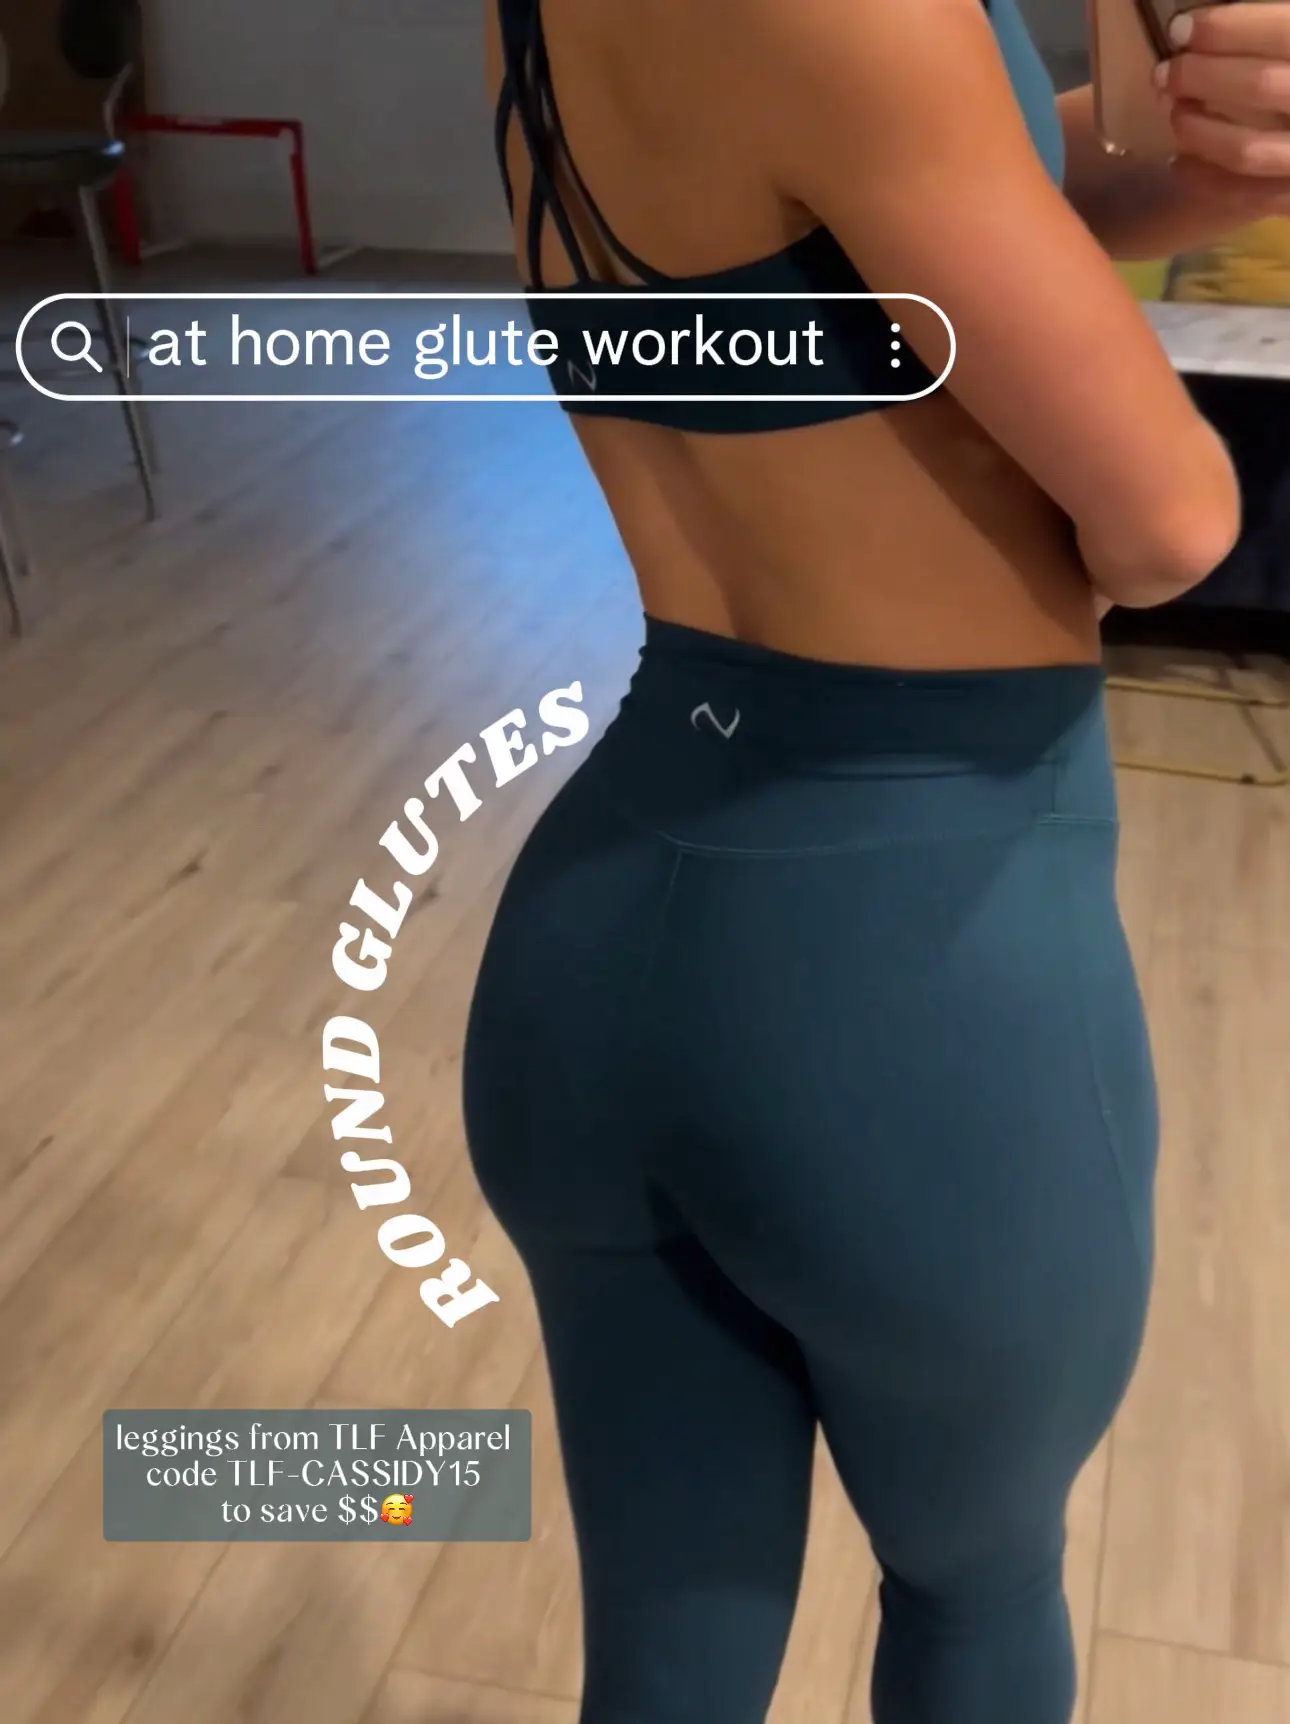 NO GYM? GET MASSIVE GLUTE GAINS AT🏠Dumbbell Only